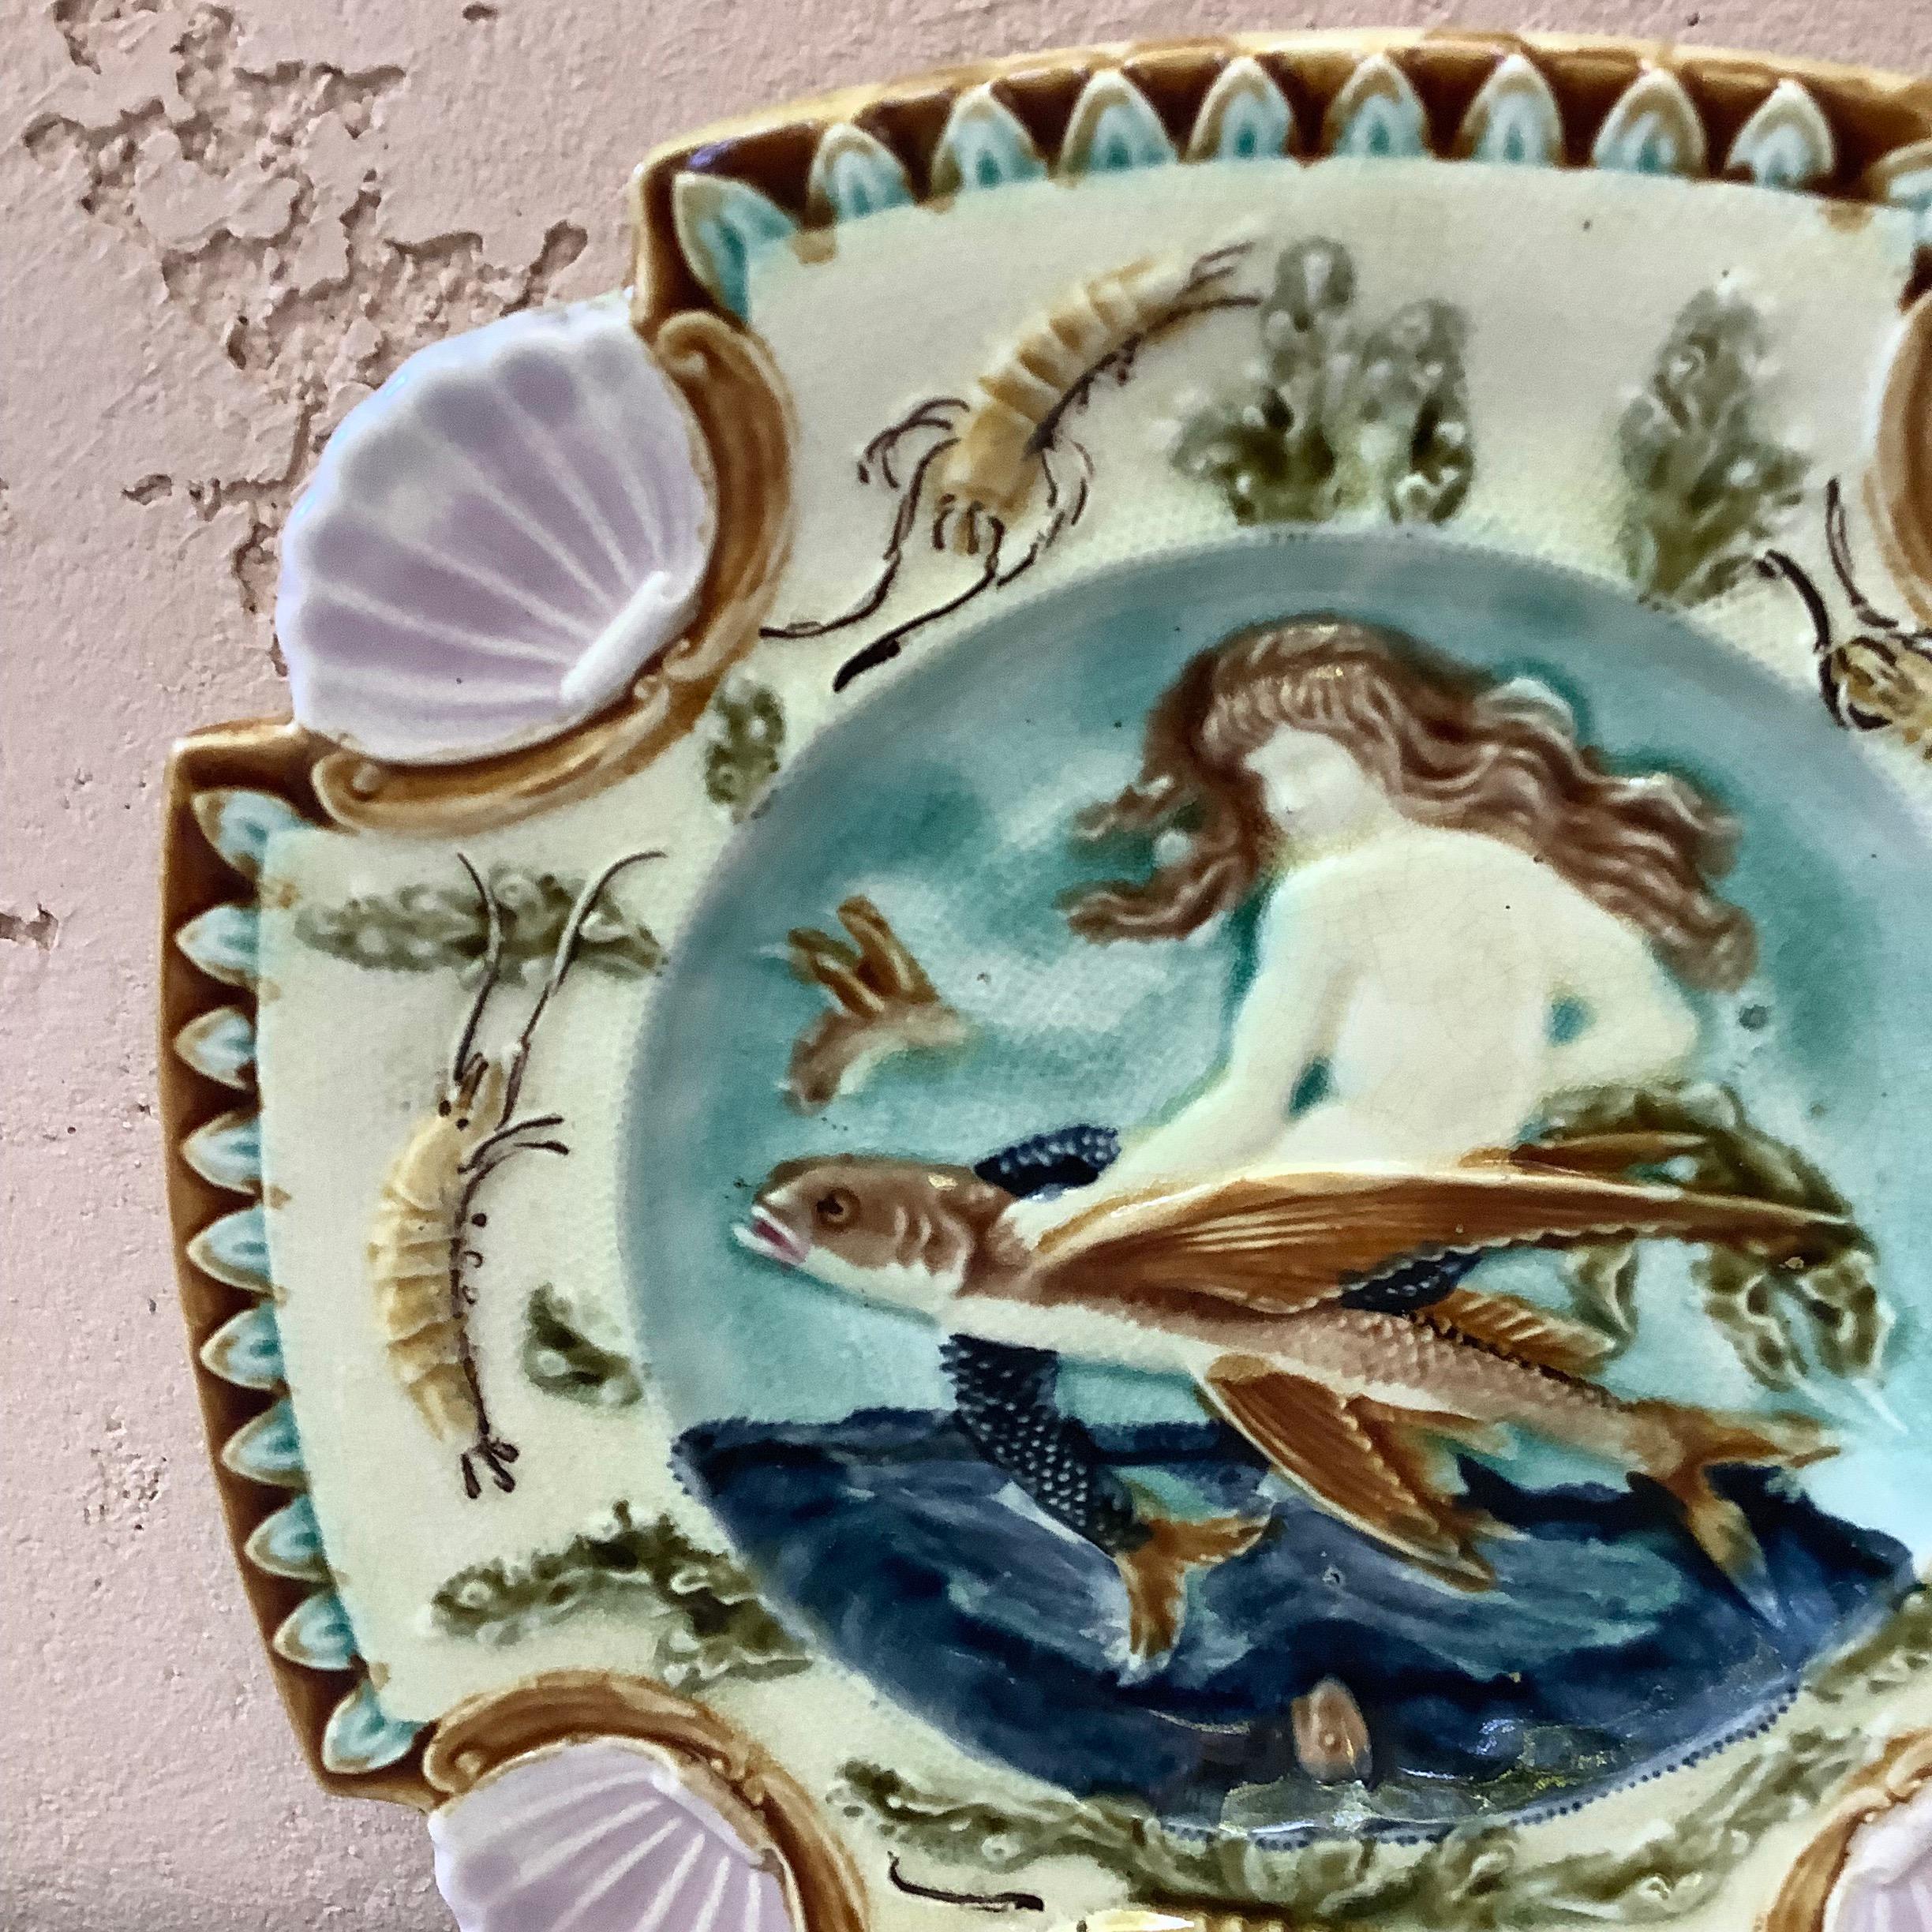 Square Majolica mermaid plate with shells on the corners, the mermaid sit on a flying fish, the border is decorated with shrimps, circa 1880.